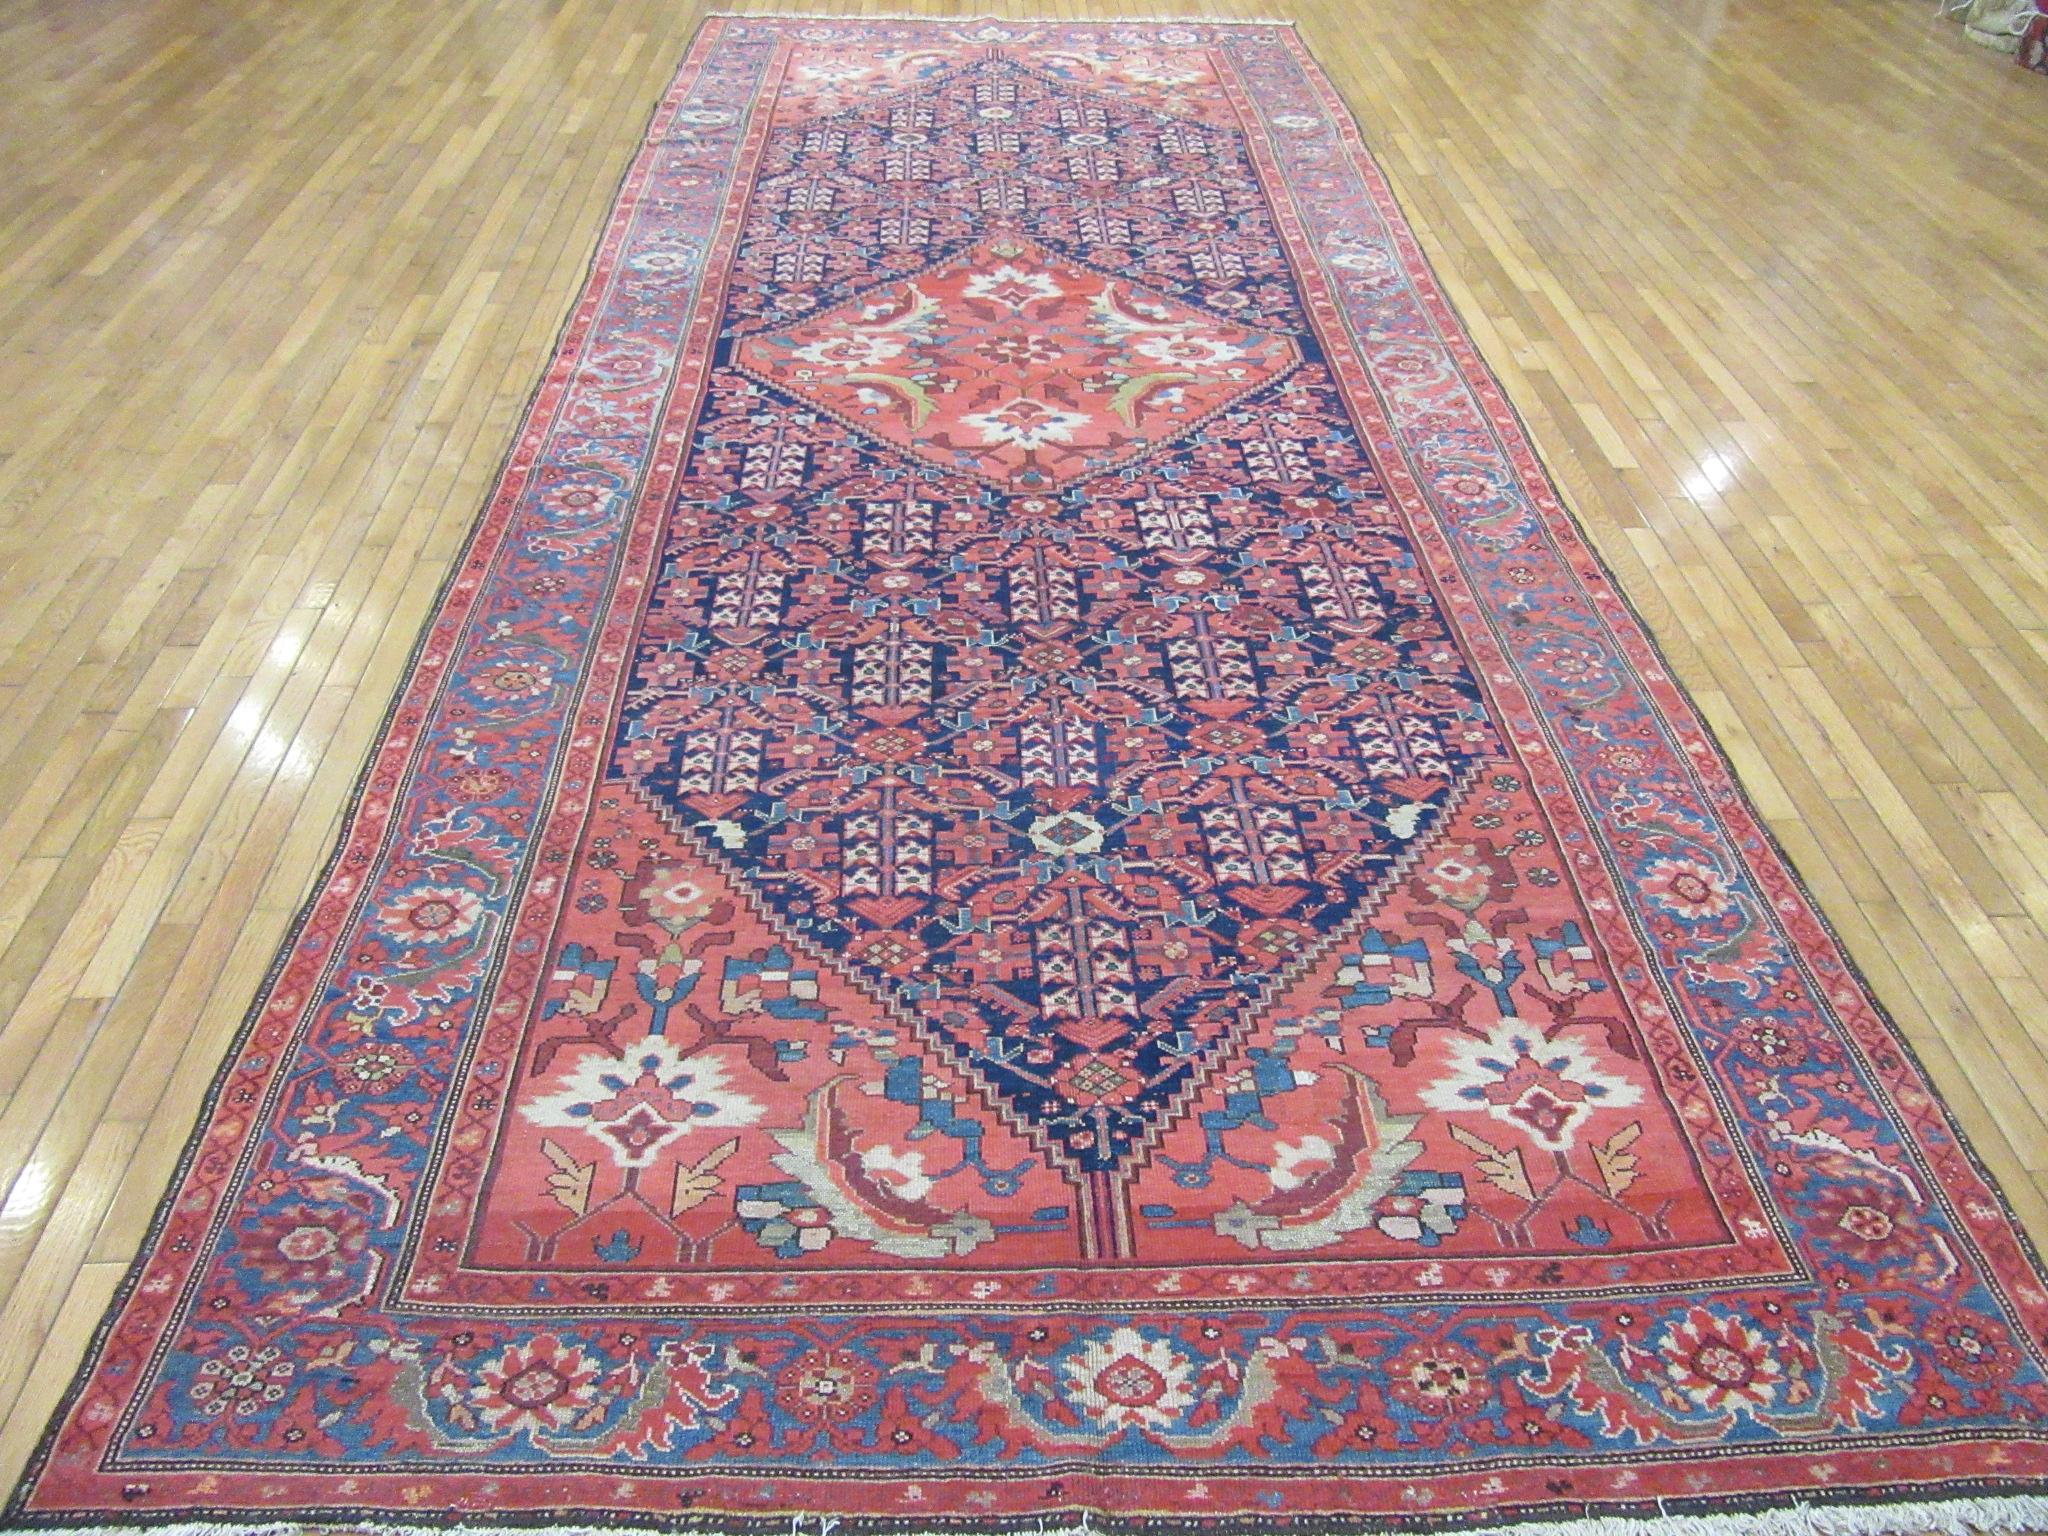 This is an antique hand knotted wool gallery size rug made with wool colored with natural dyes. It has a distinct pattern with a central and corner medallion design on a navy blue background, The rug measures 6' 6